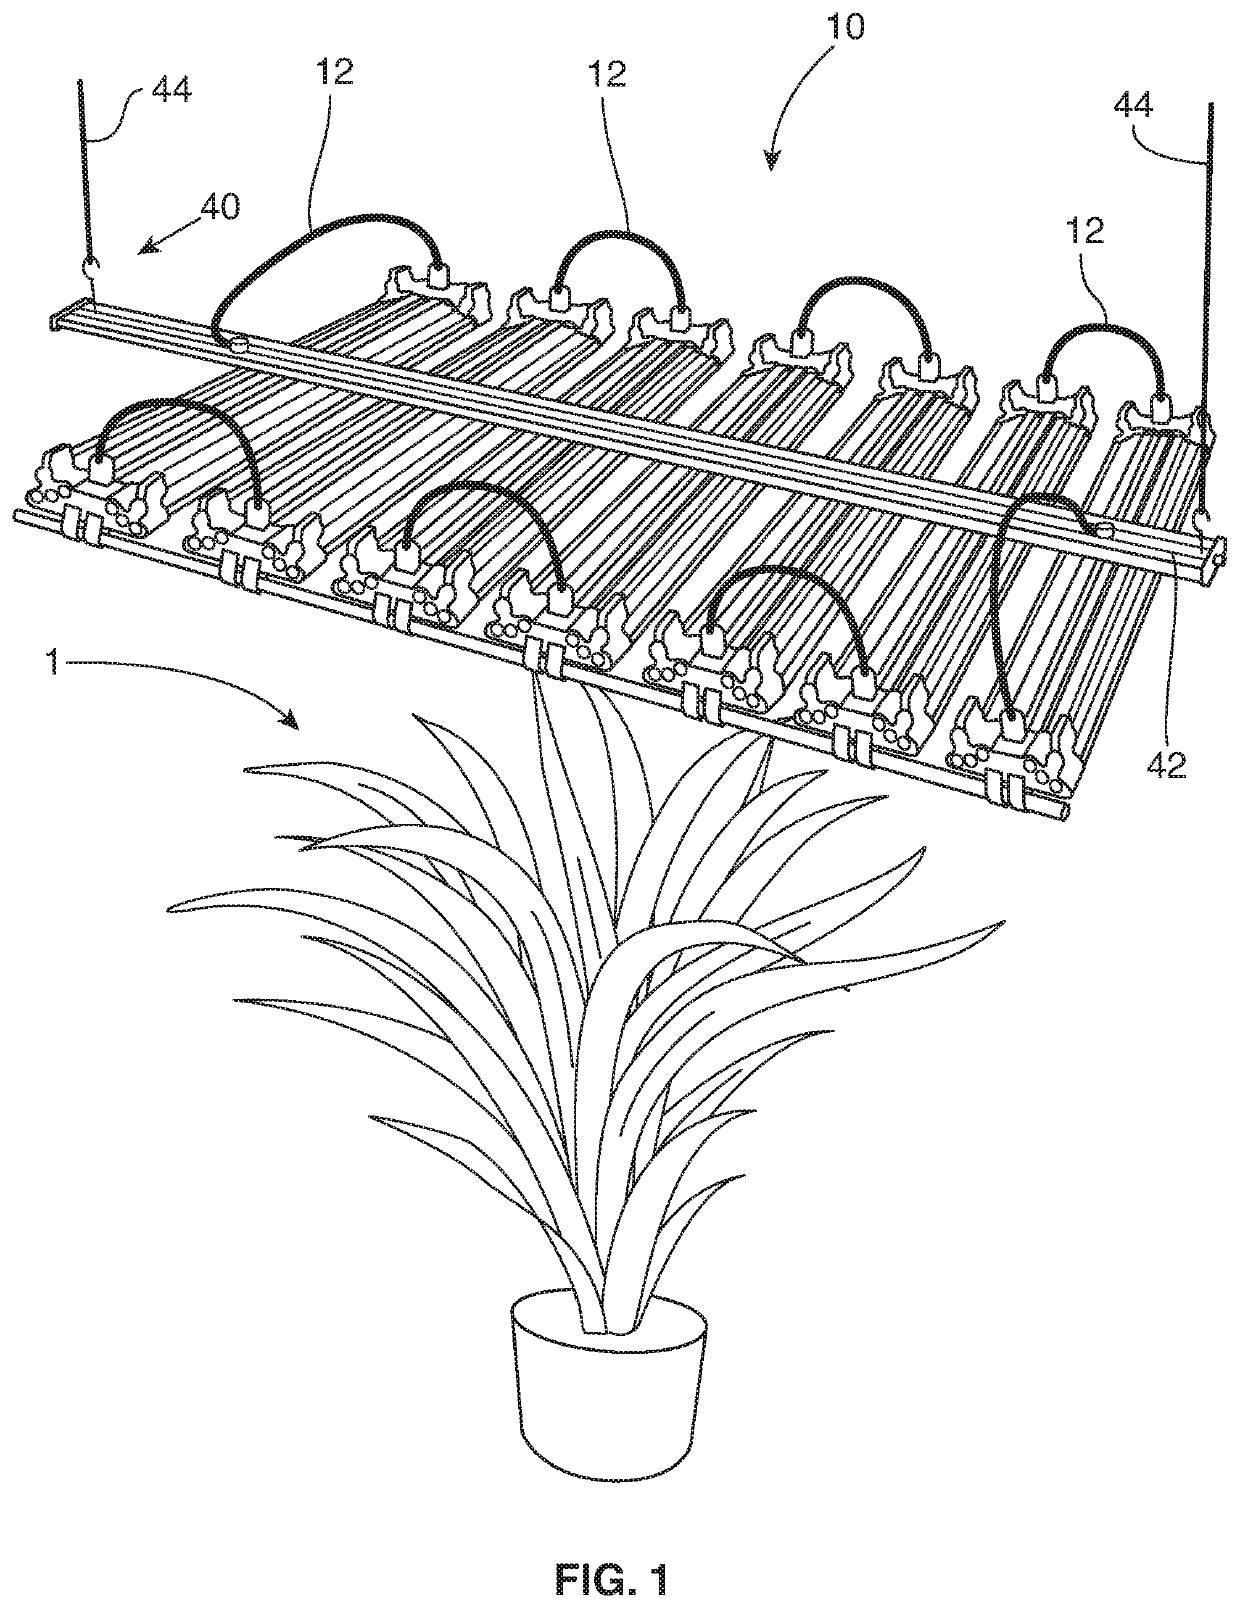 Grow light assembly with secondary light modules angularly movable relative to primary light modules